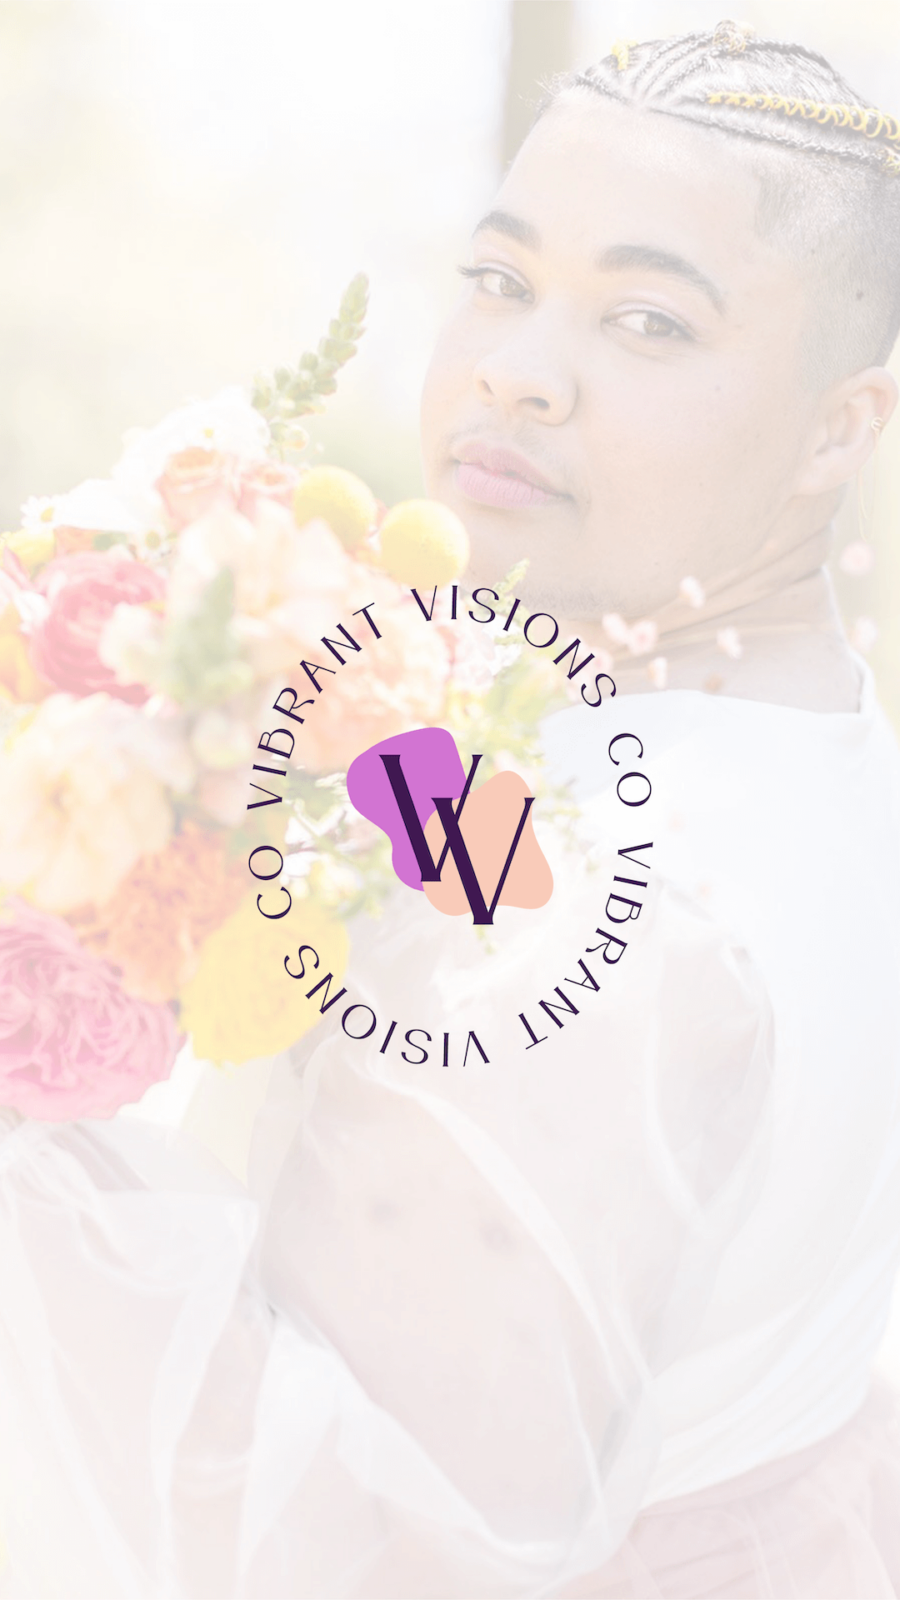 Vibrant Visions Co. Brand Submark over image